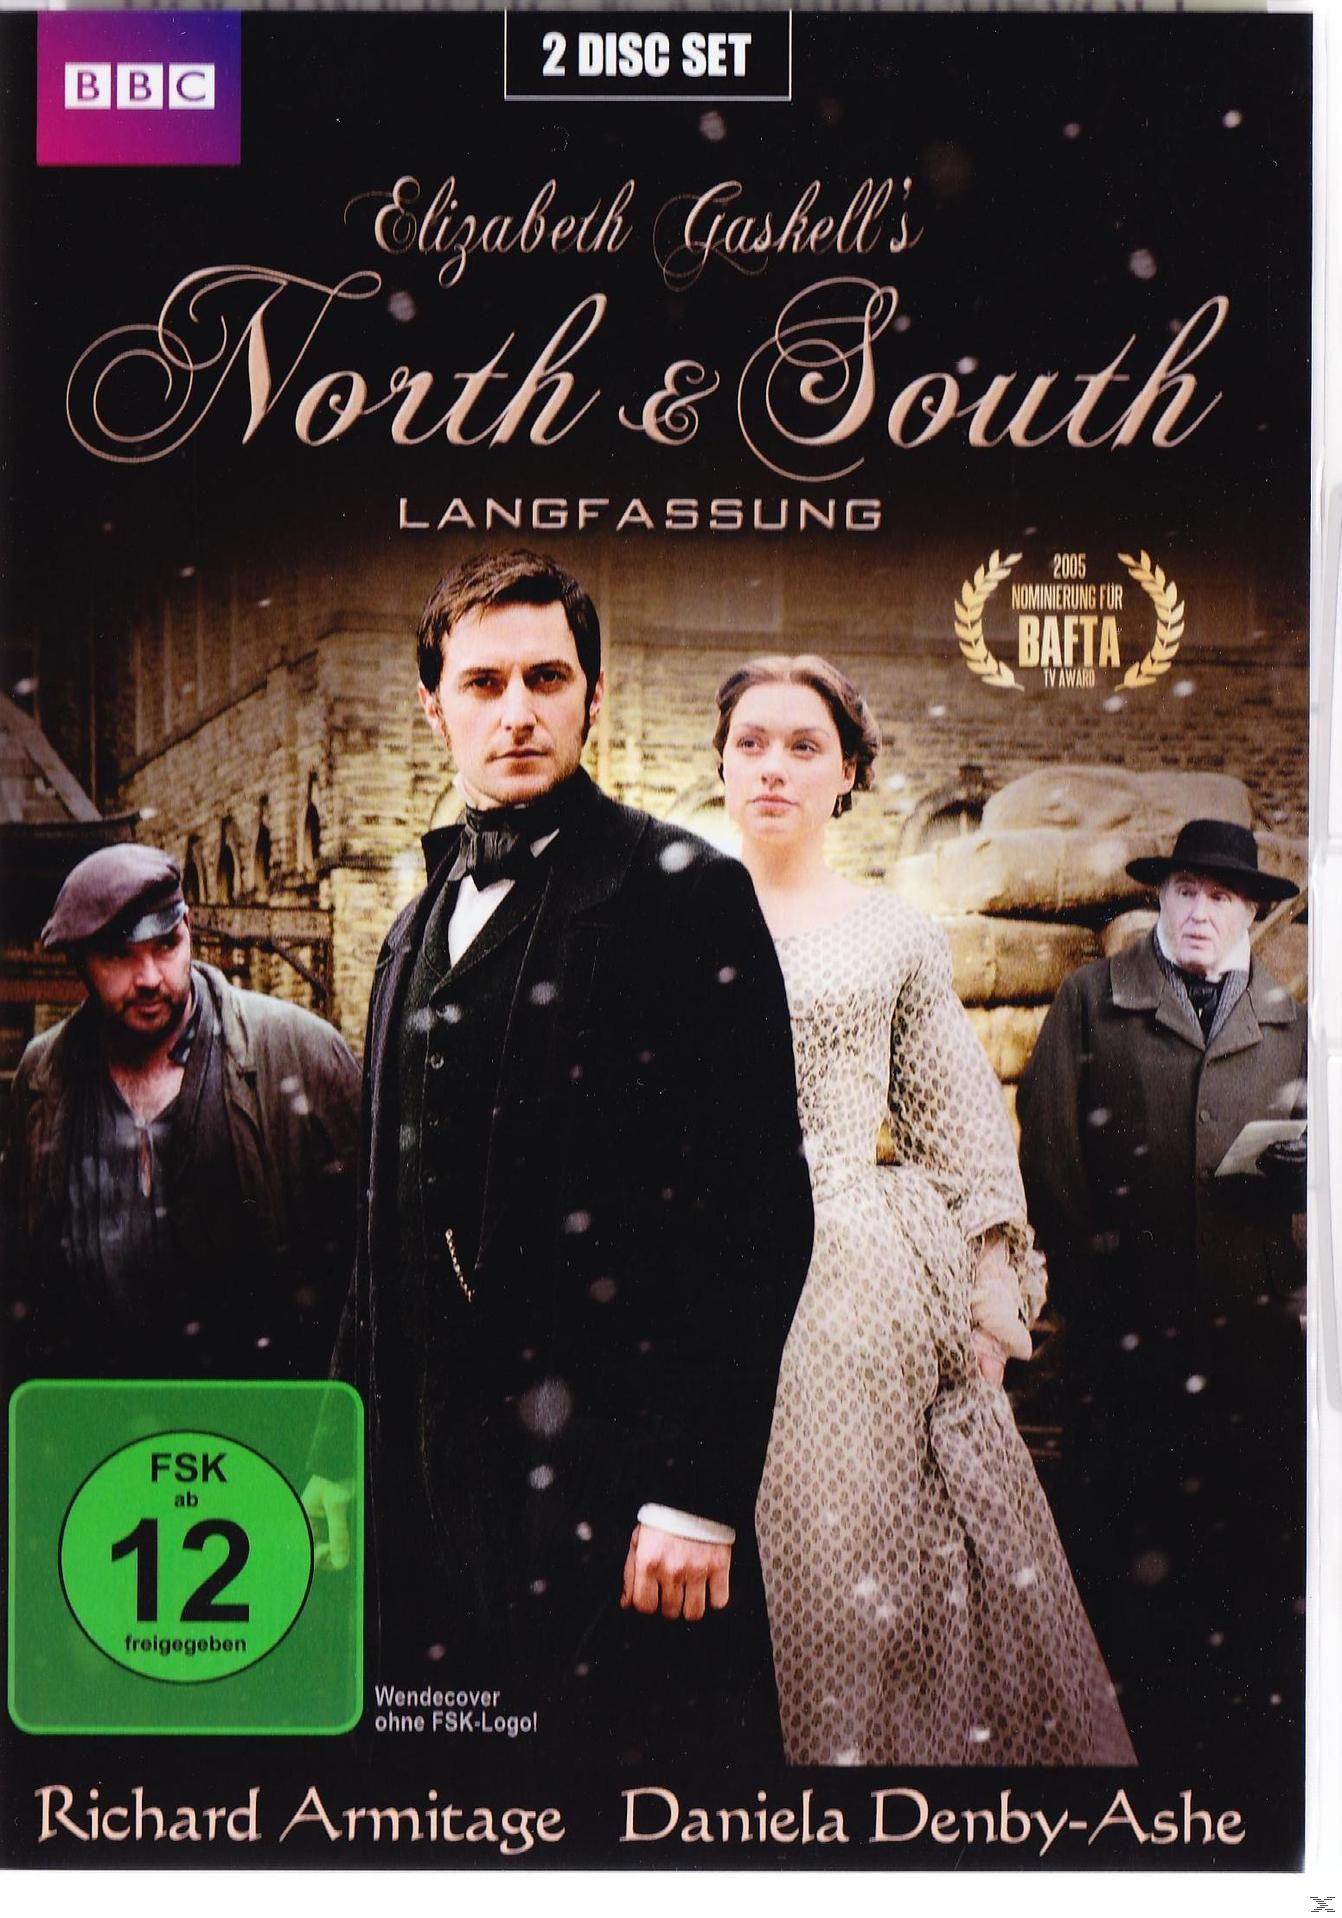 DVD and South North